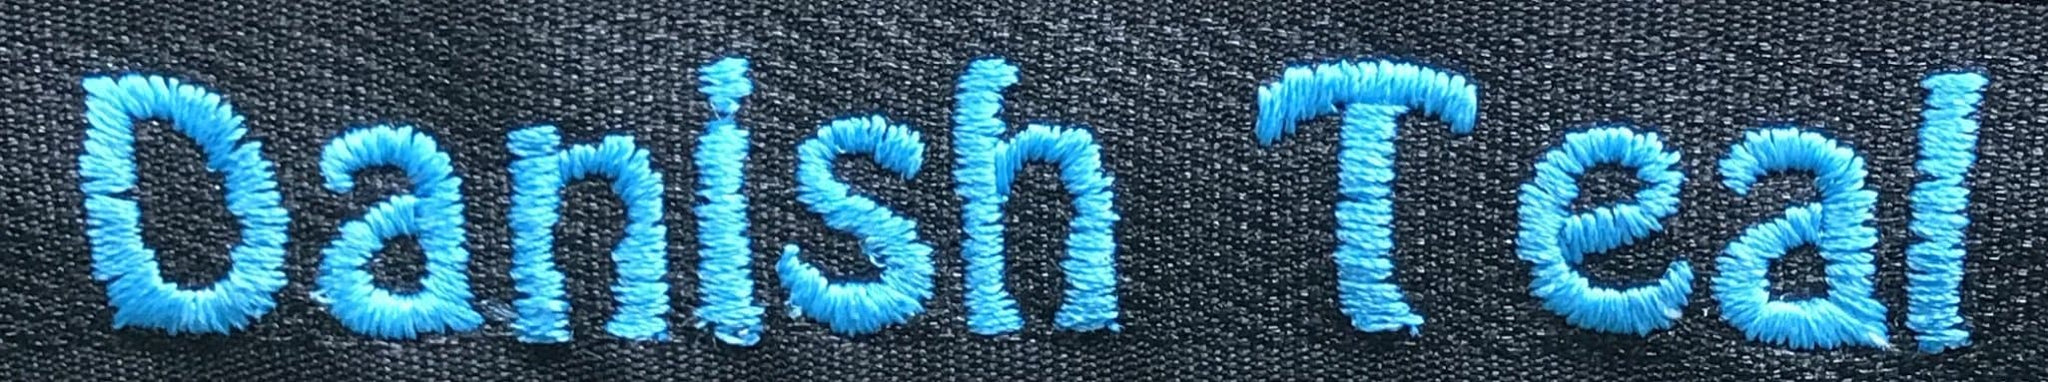 example of embroidery in Danish teal